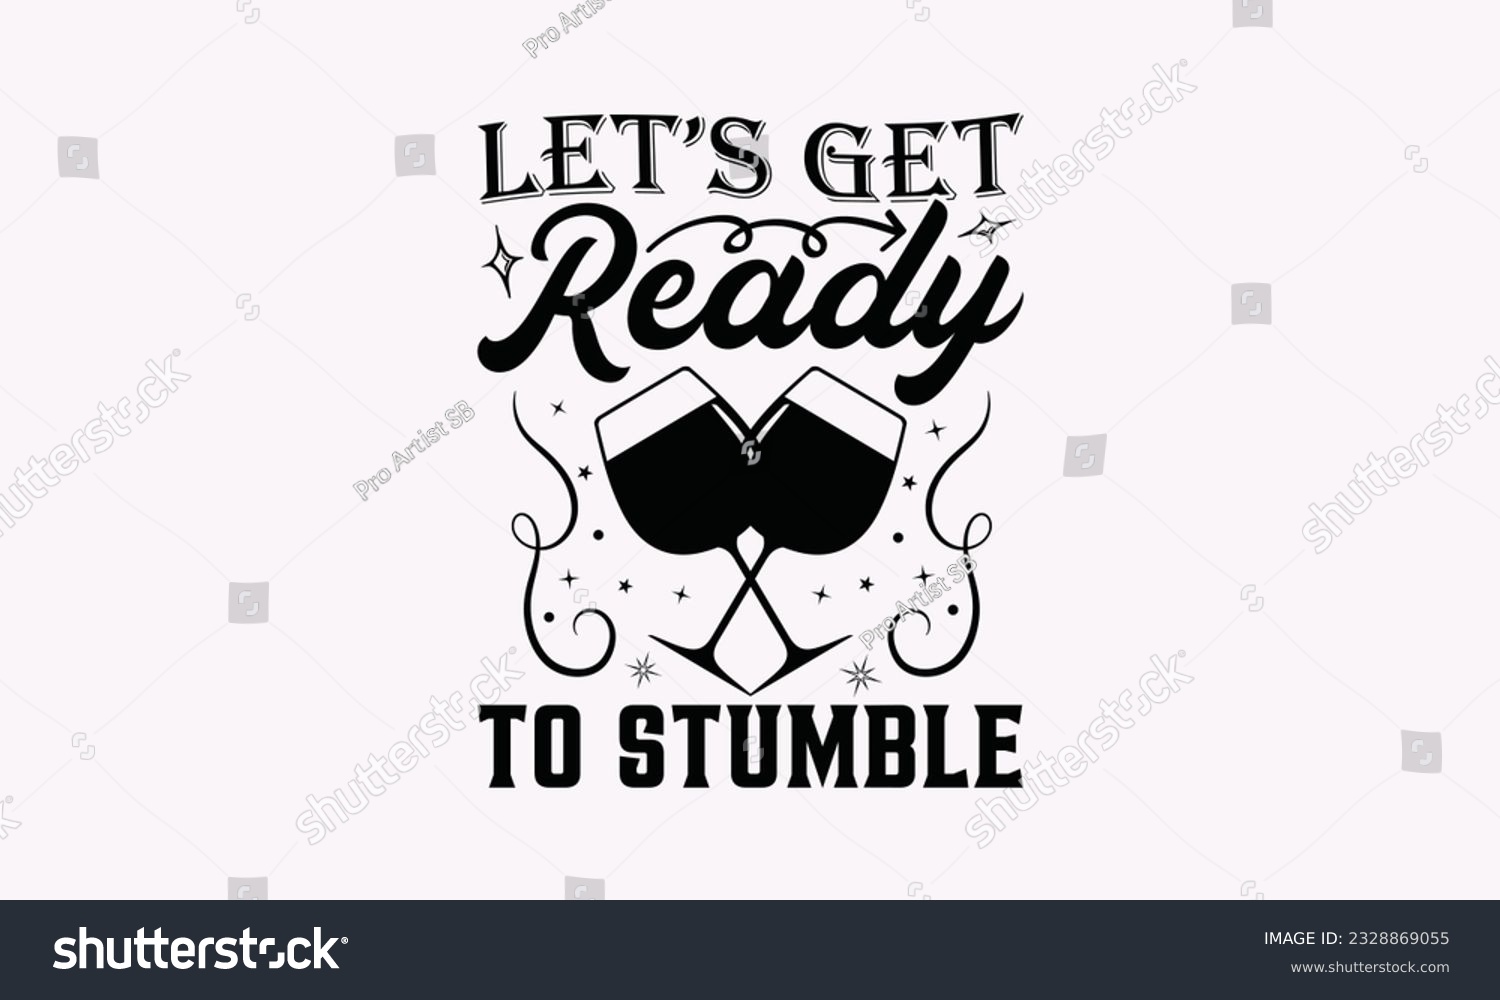 SVG of Let’s Get Ready To Stumble - Alcohol SVG Design, Cheer Quotes, Hand drawn lettering phrase, Isolated on white background. svg